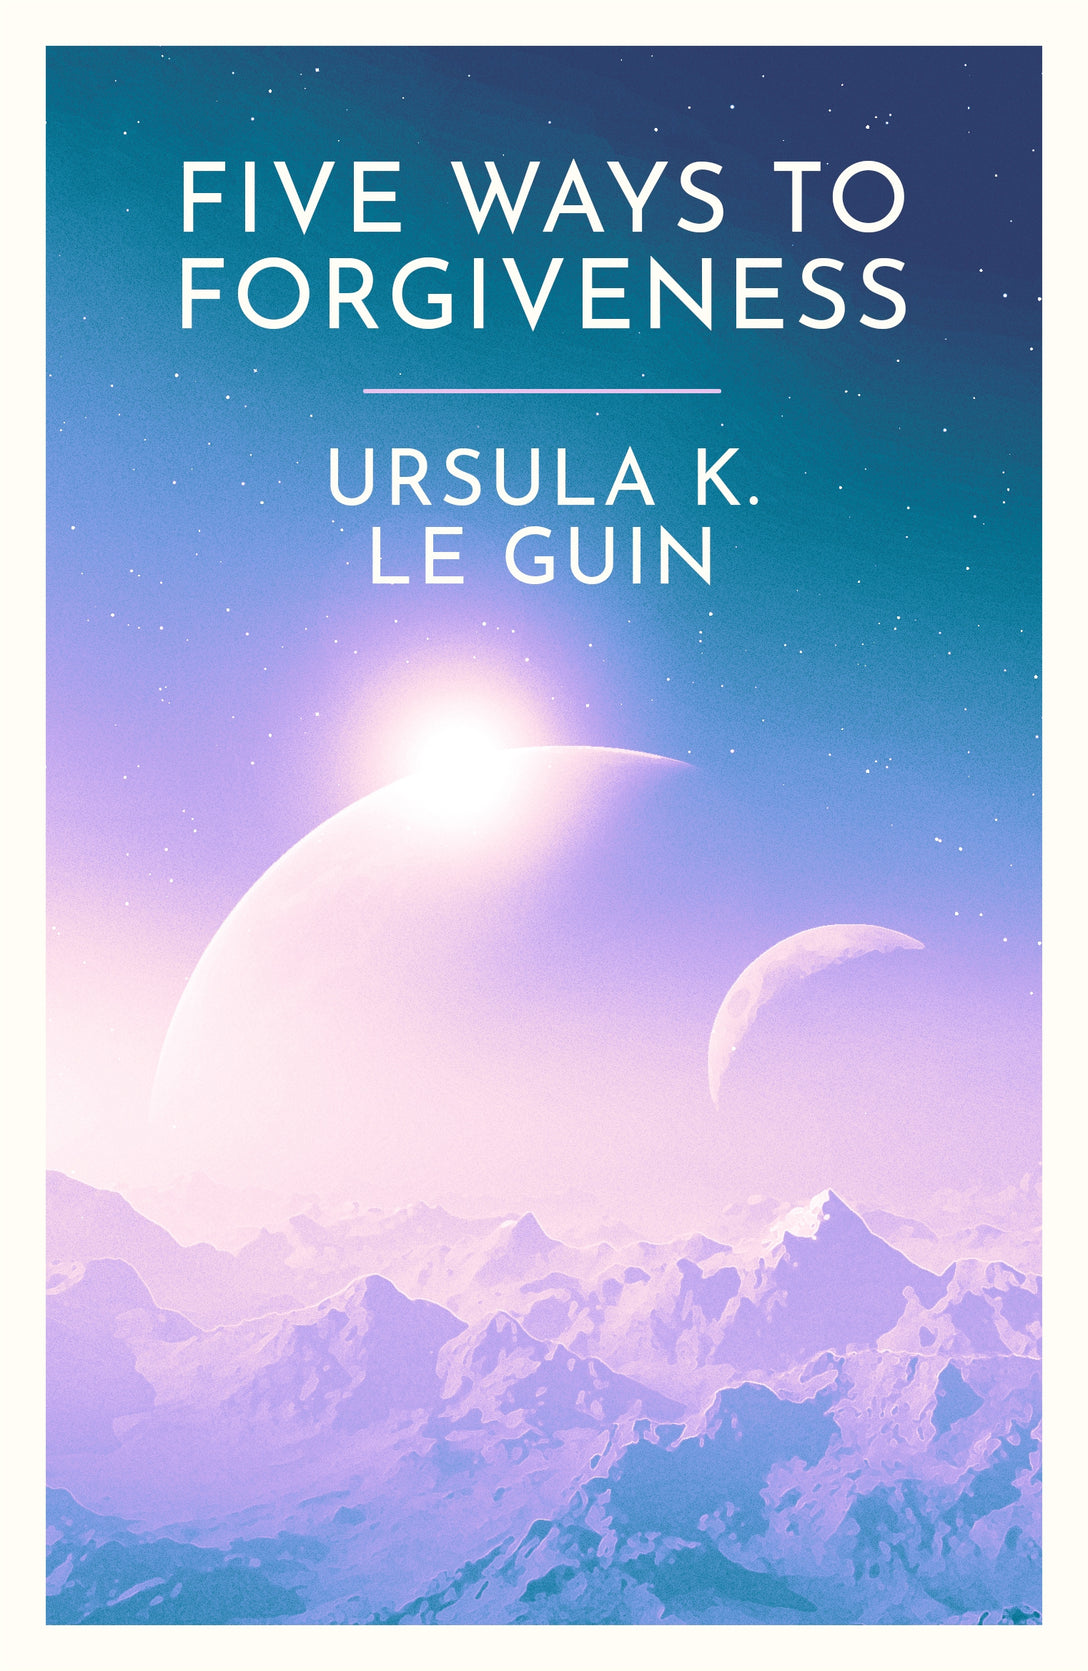 Five Ways to Forgiveness by Ursula K. Le Guin